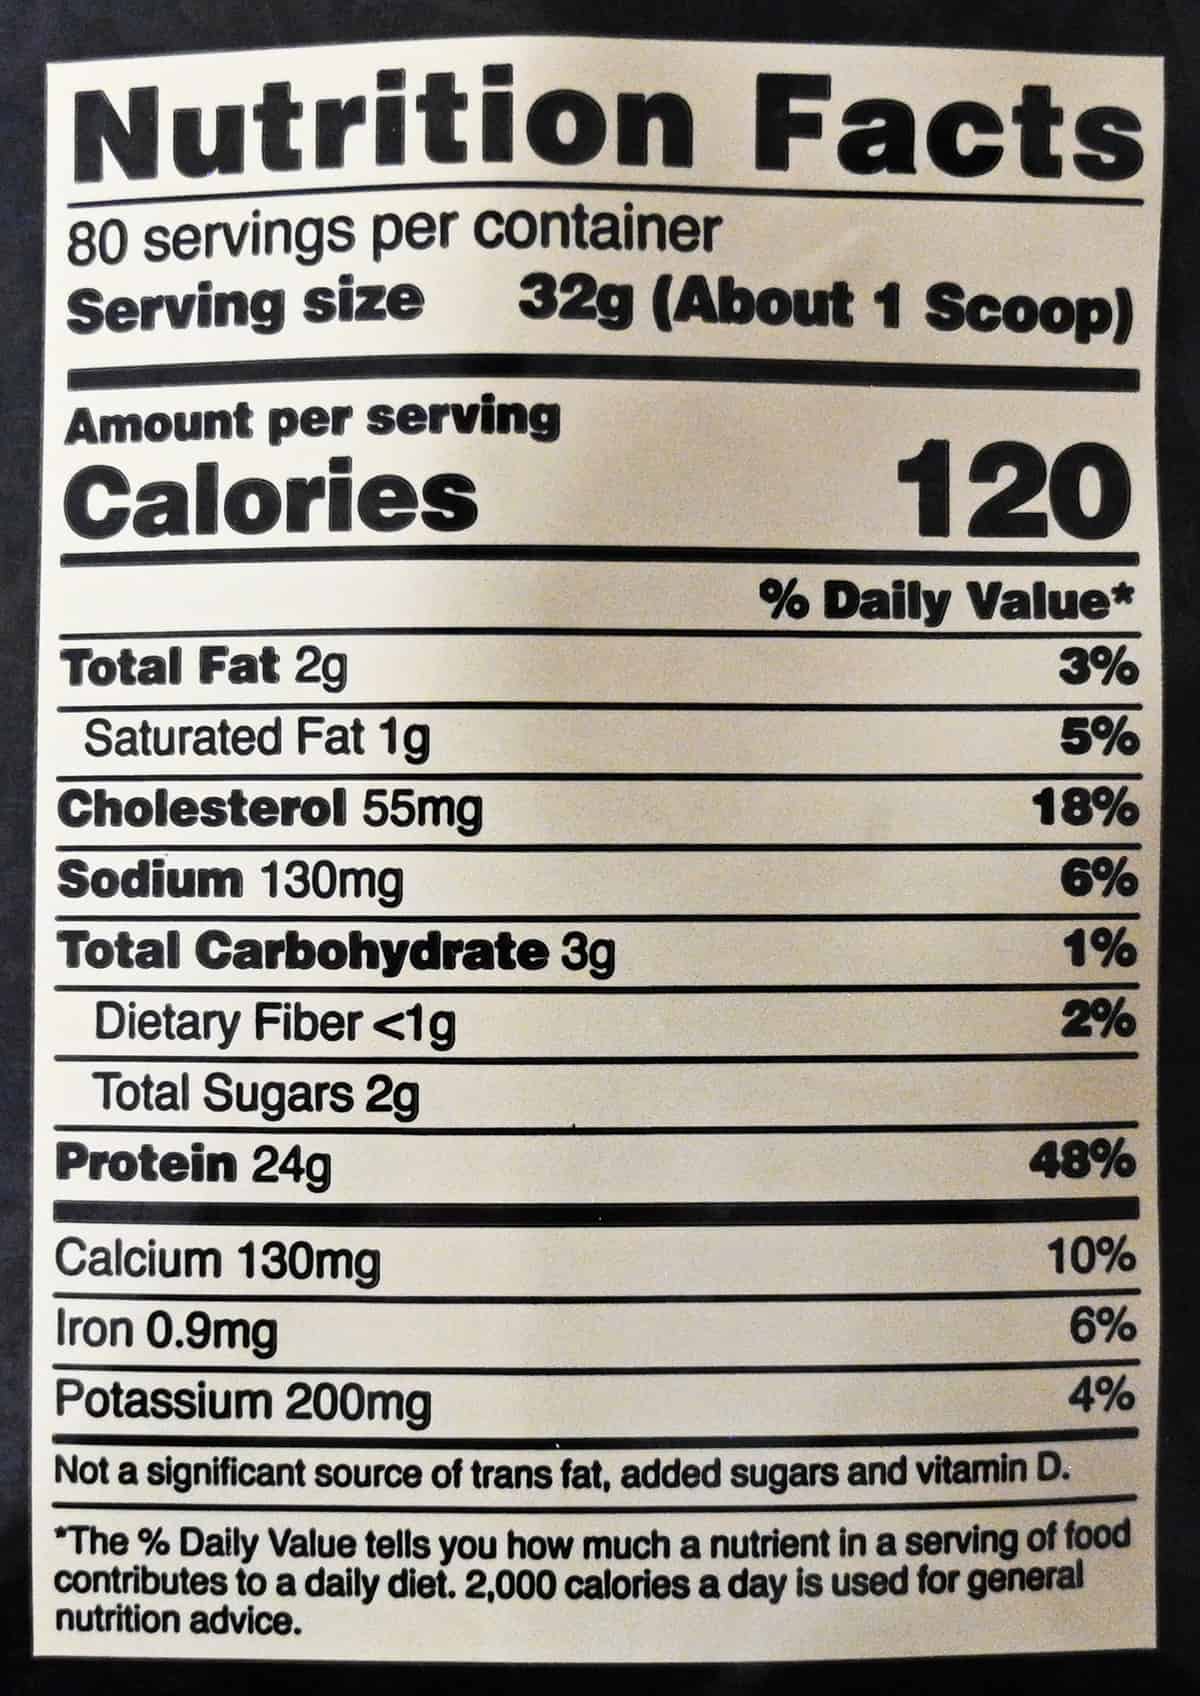 Image of the extreme milk chocolate nutrition facts from the back of the bag.